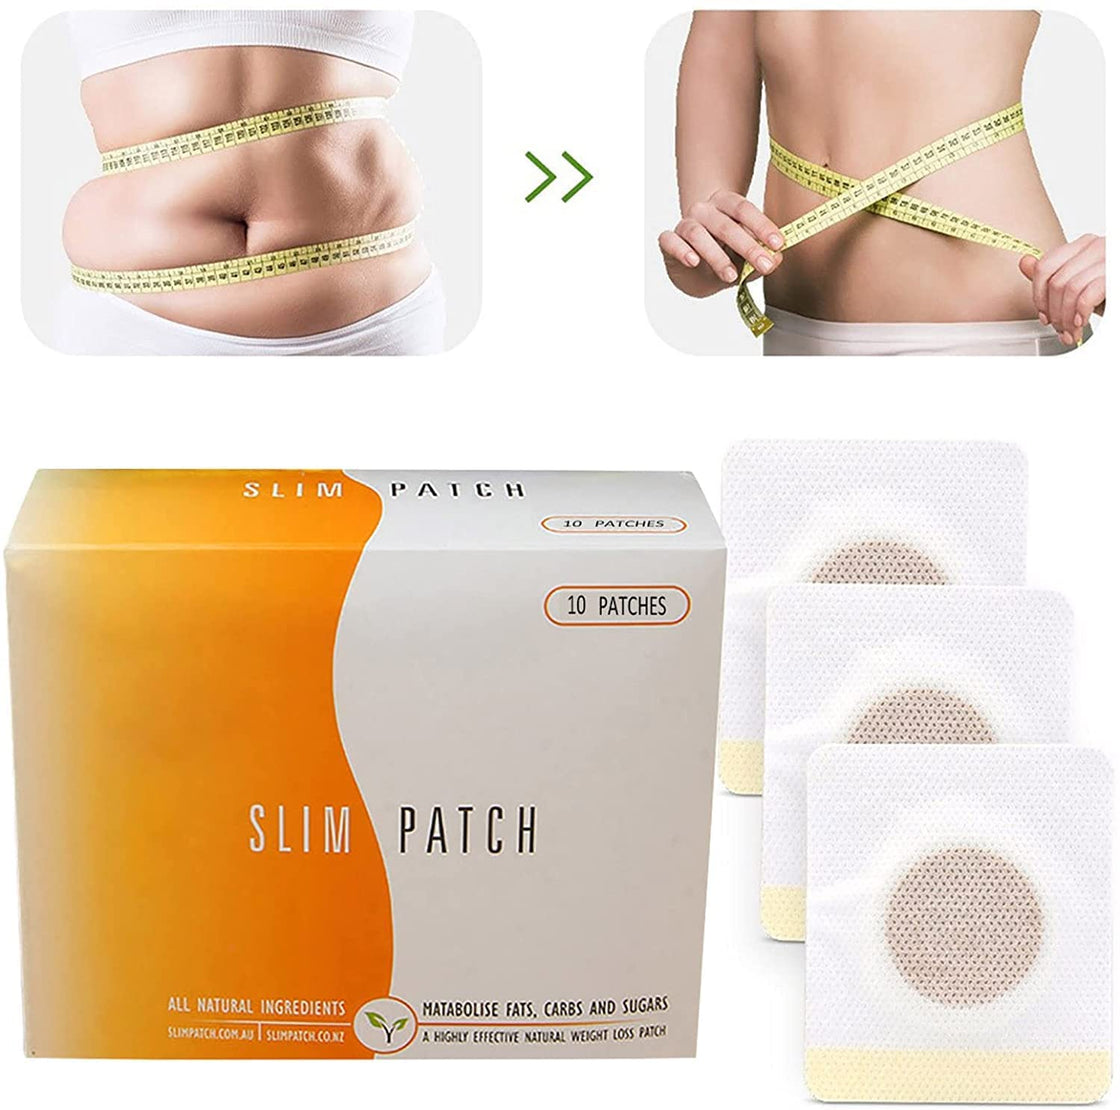 10-120 Pcs Slim Patch Weight Loss Burn Fat Diet Fast Acting